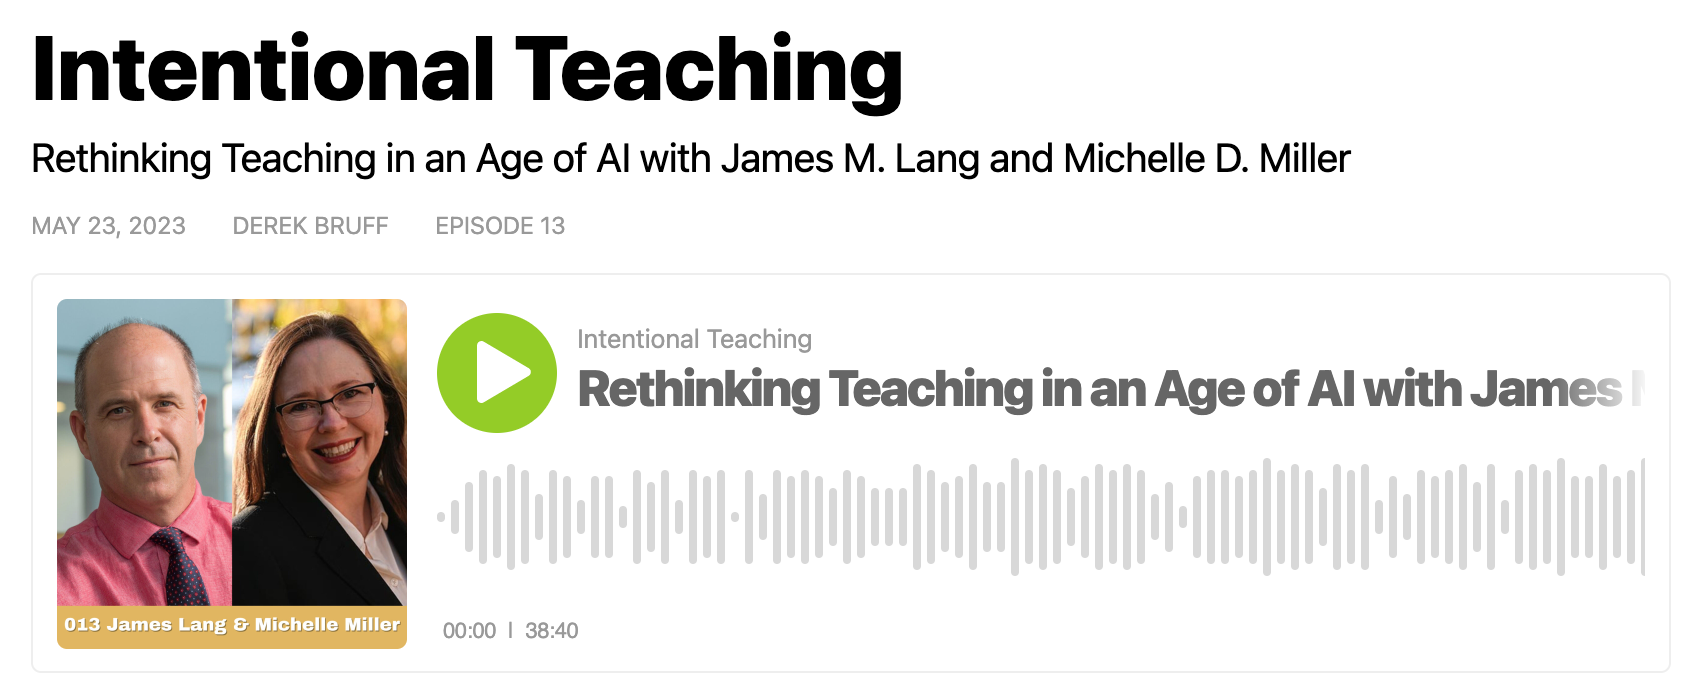 Podcast from Derek Bruff -- Rethinking Teaching in an Age of AI with James M. Lang and Michelle D. Miller